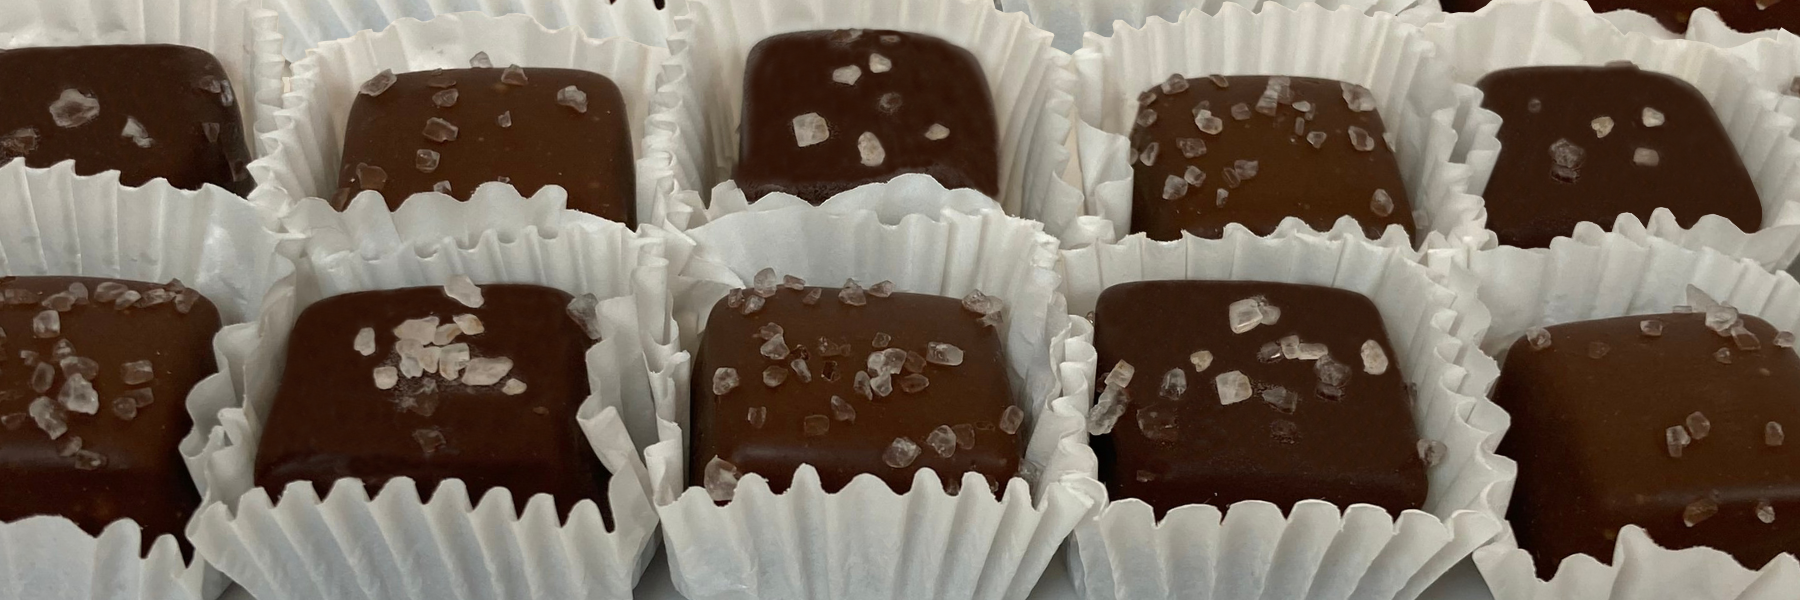 Dilettante Chocolates Classic Caramel Flavor Featuring Caramels Dipped in Milk and Dark Chocolate